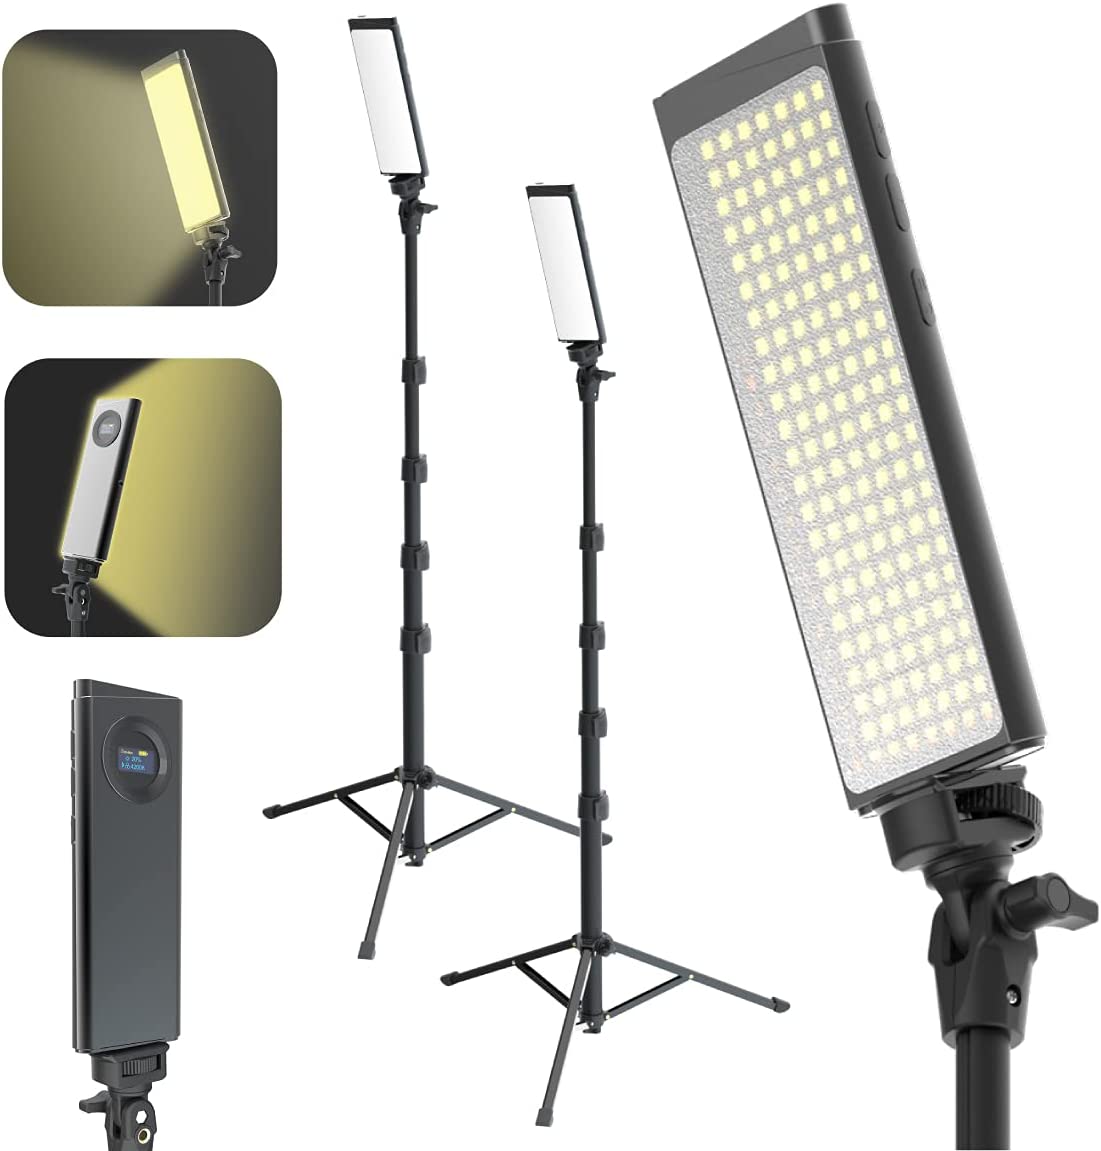 Digipower - DPS-TPL-200 PRO2 Two Point Lighting Set - Two 180 LED Lights + Two Pro Stands Kit For Home, Studio, Content Creation & Vlogging - Black